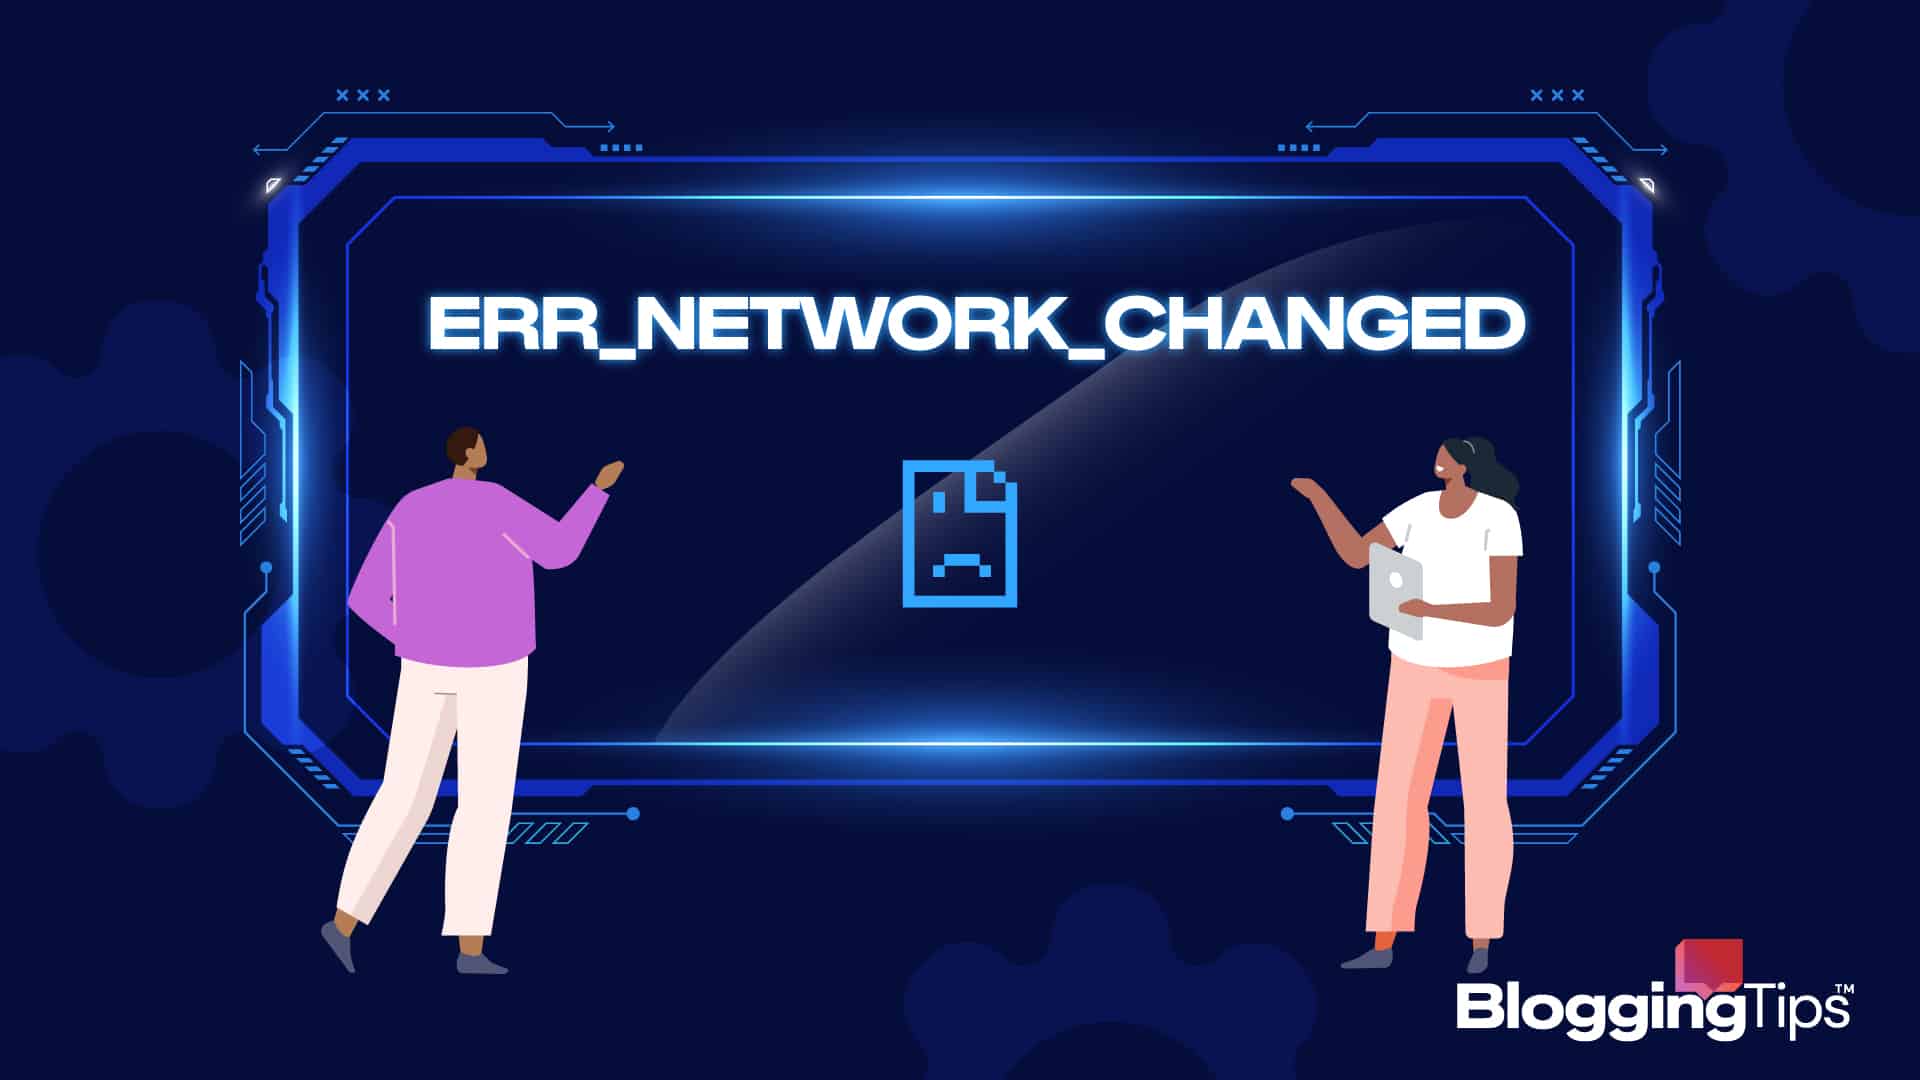 vector graphic showing an illustration of people learning about an err network change